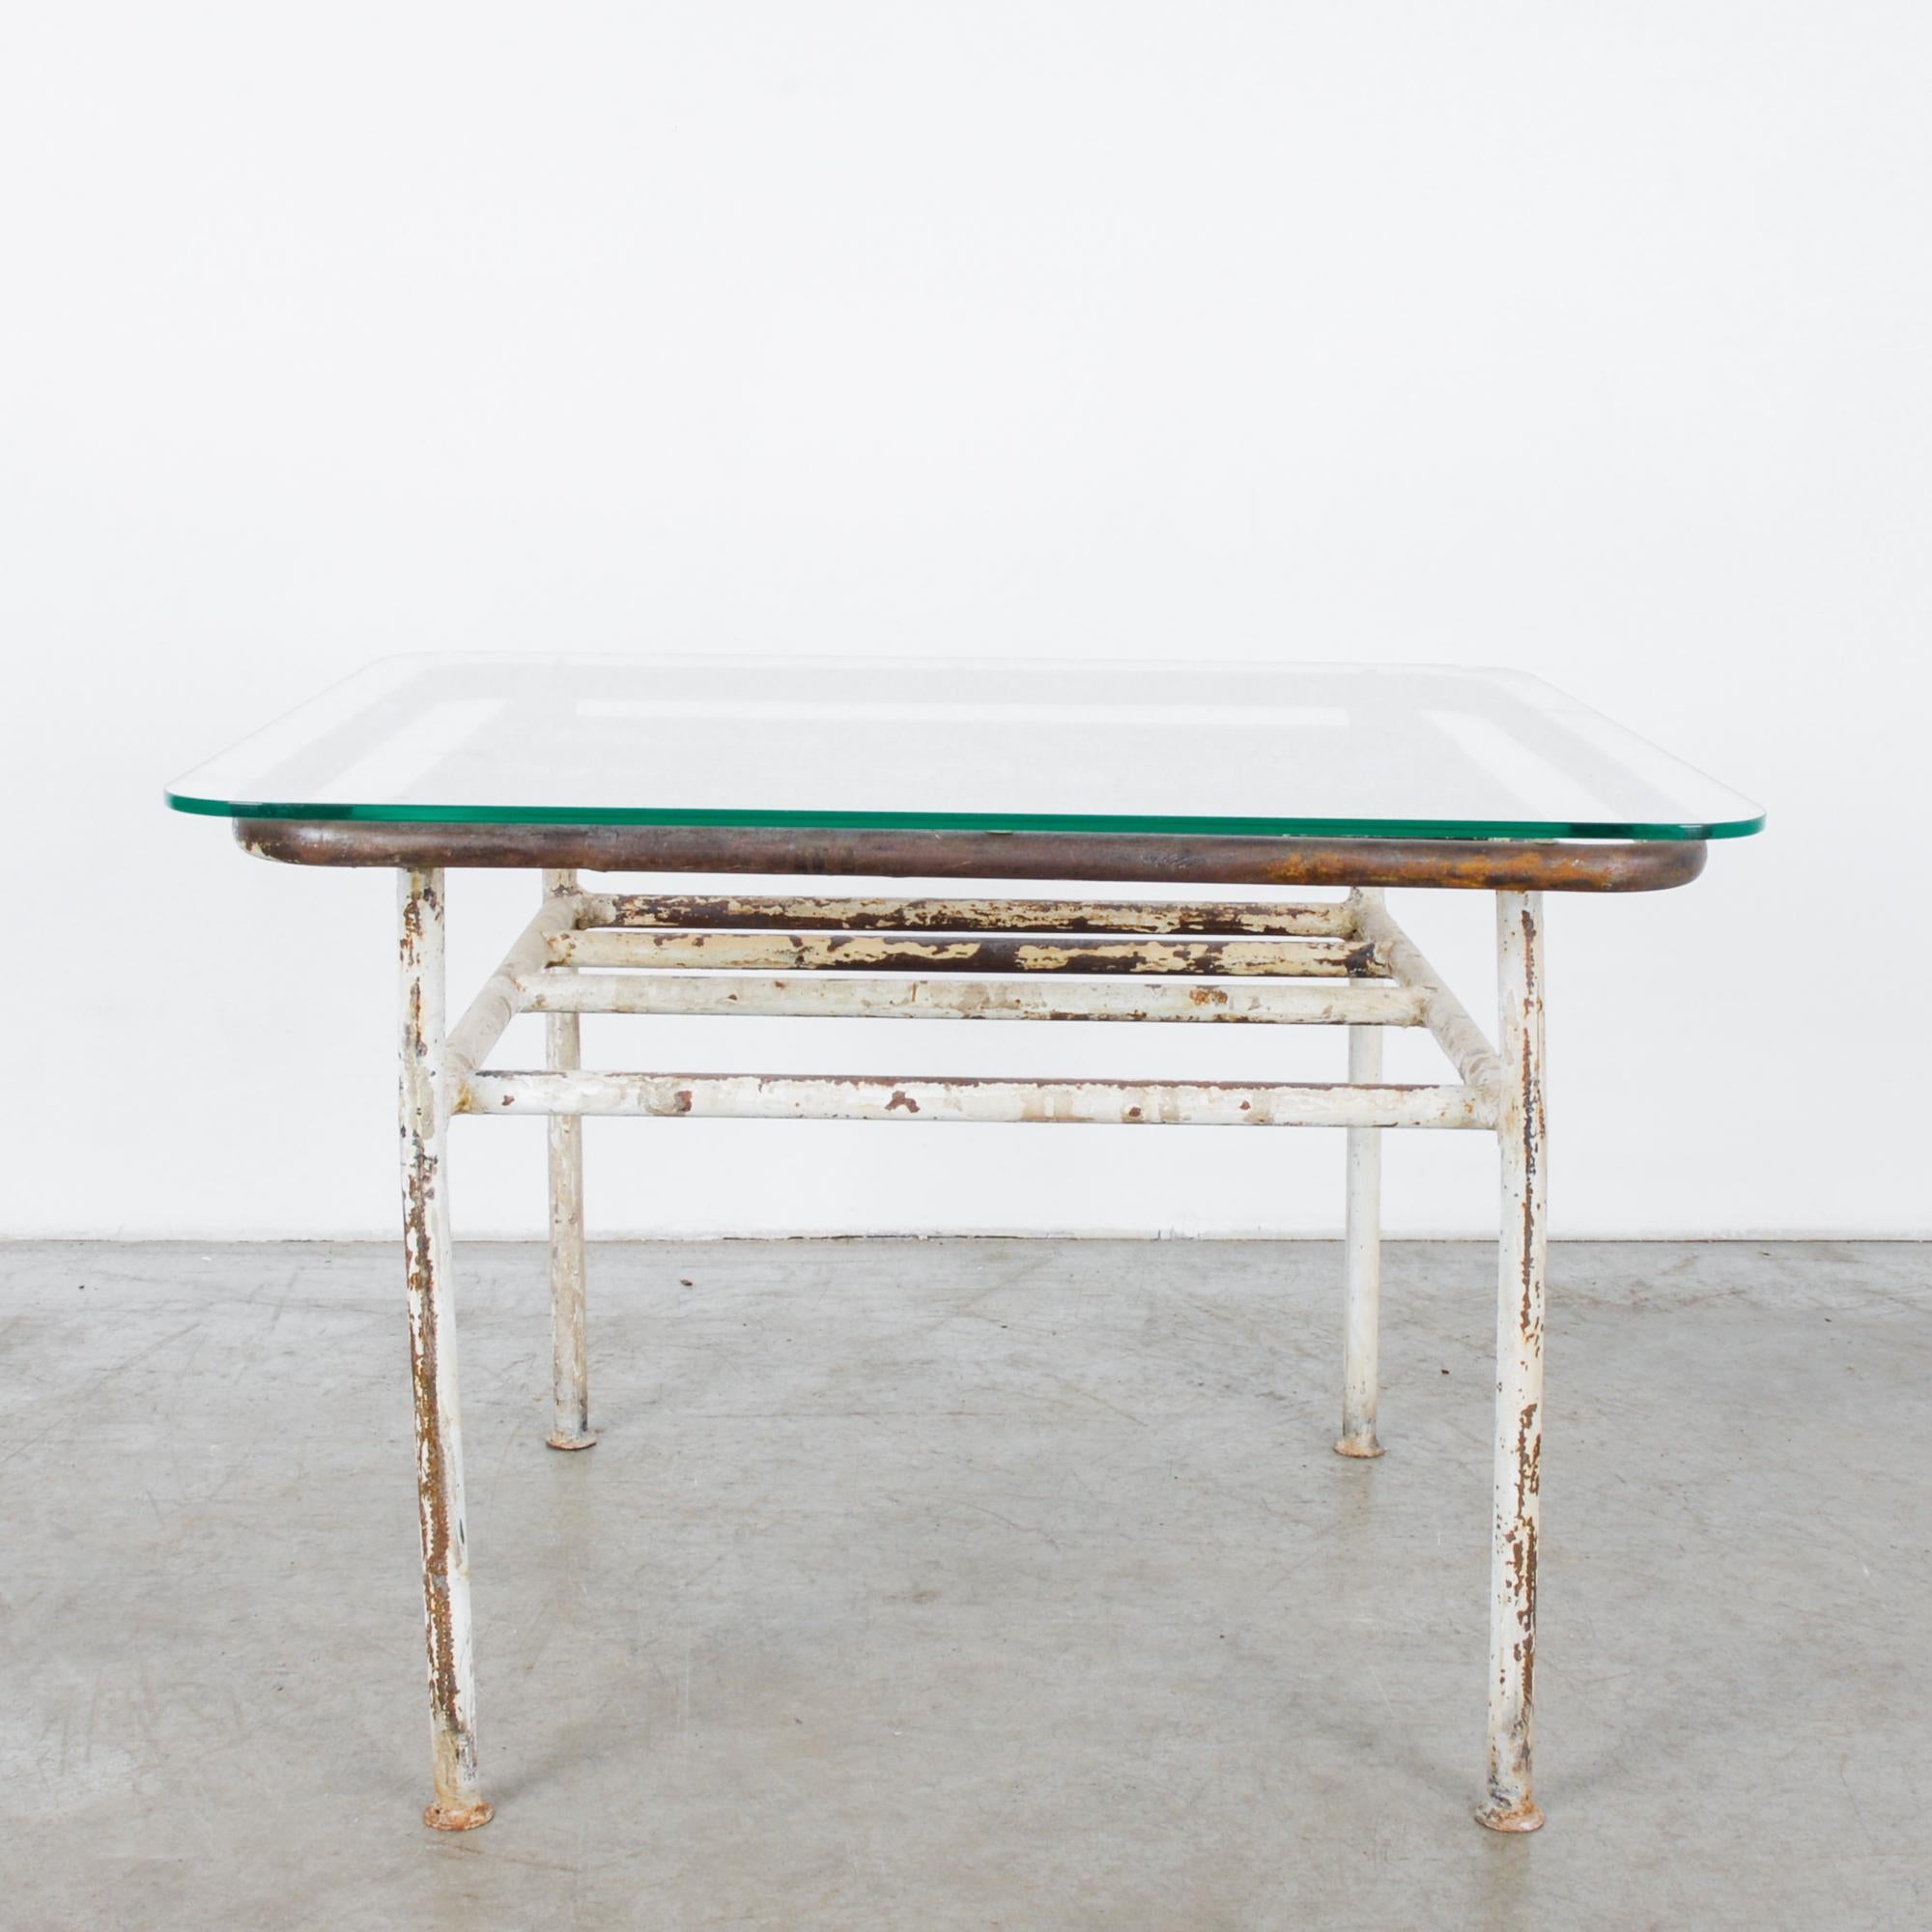 This coffee table was made in France, circa 1960. The clear glass tabletop features rounded edges and rests on a frame constructed from metal tubes. Originally painted white, the metal frame displays a timeworn patina, offering a lived-in,